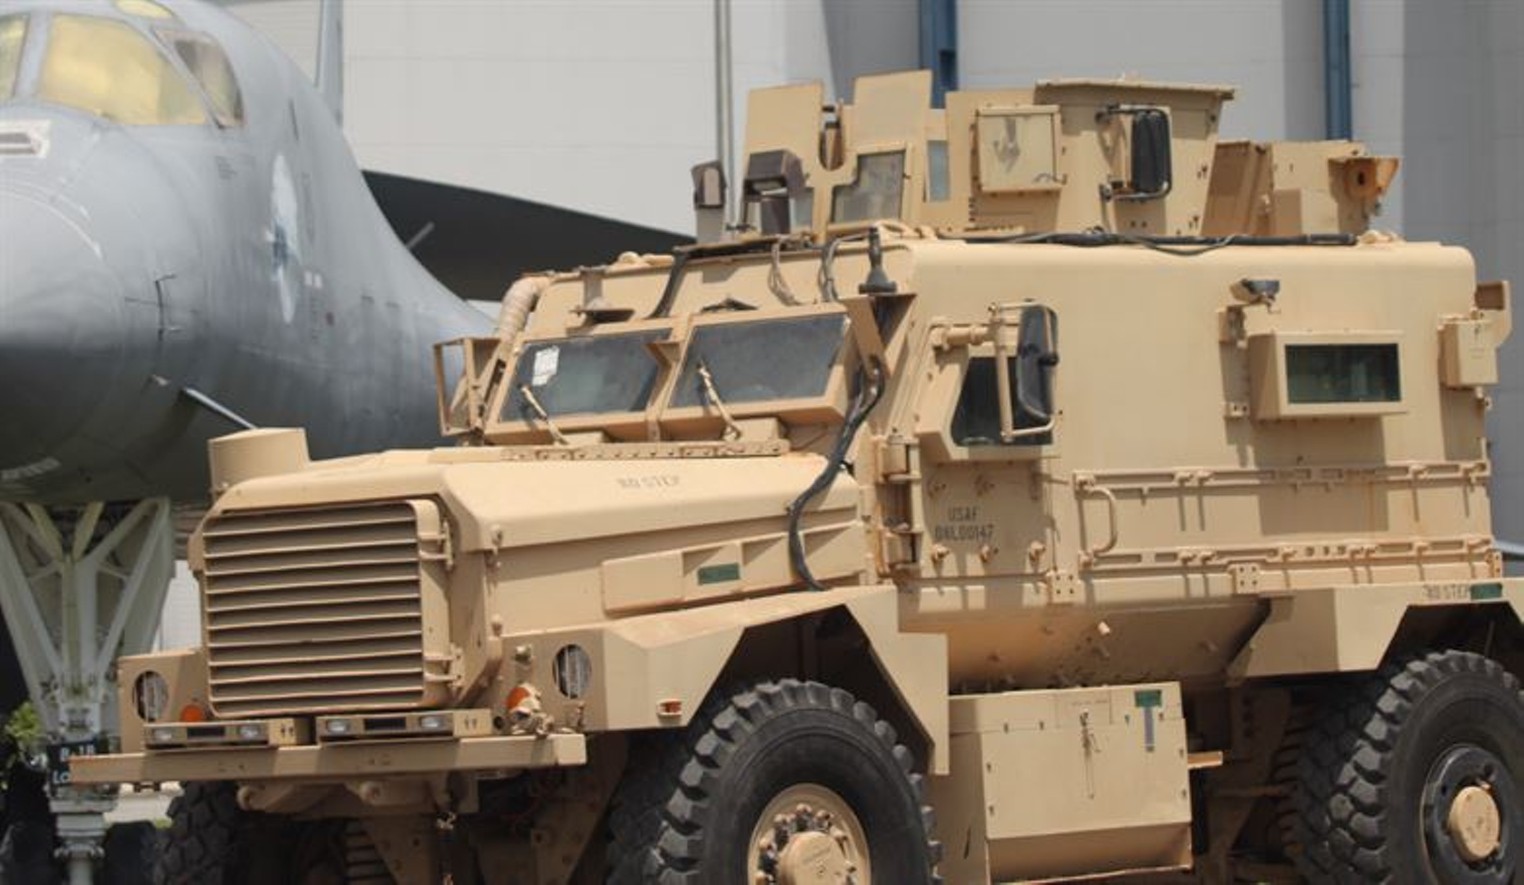 North Texas Law Enforcement Agencies Re-Evaluate Use Of Military Equipment  | Dallas Observer